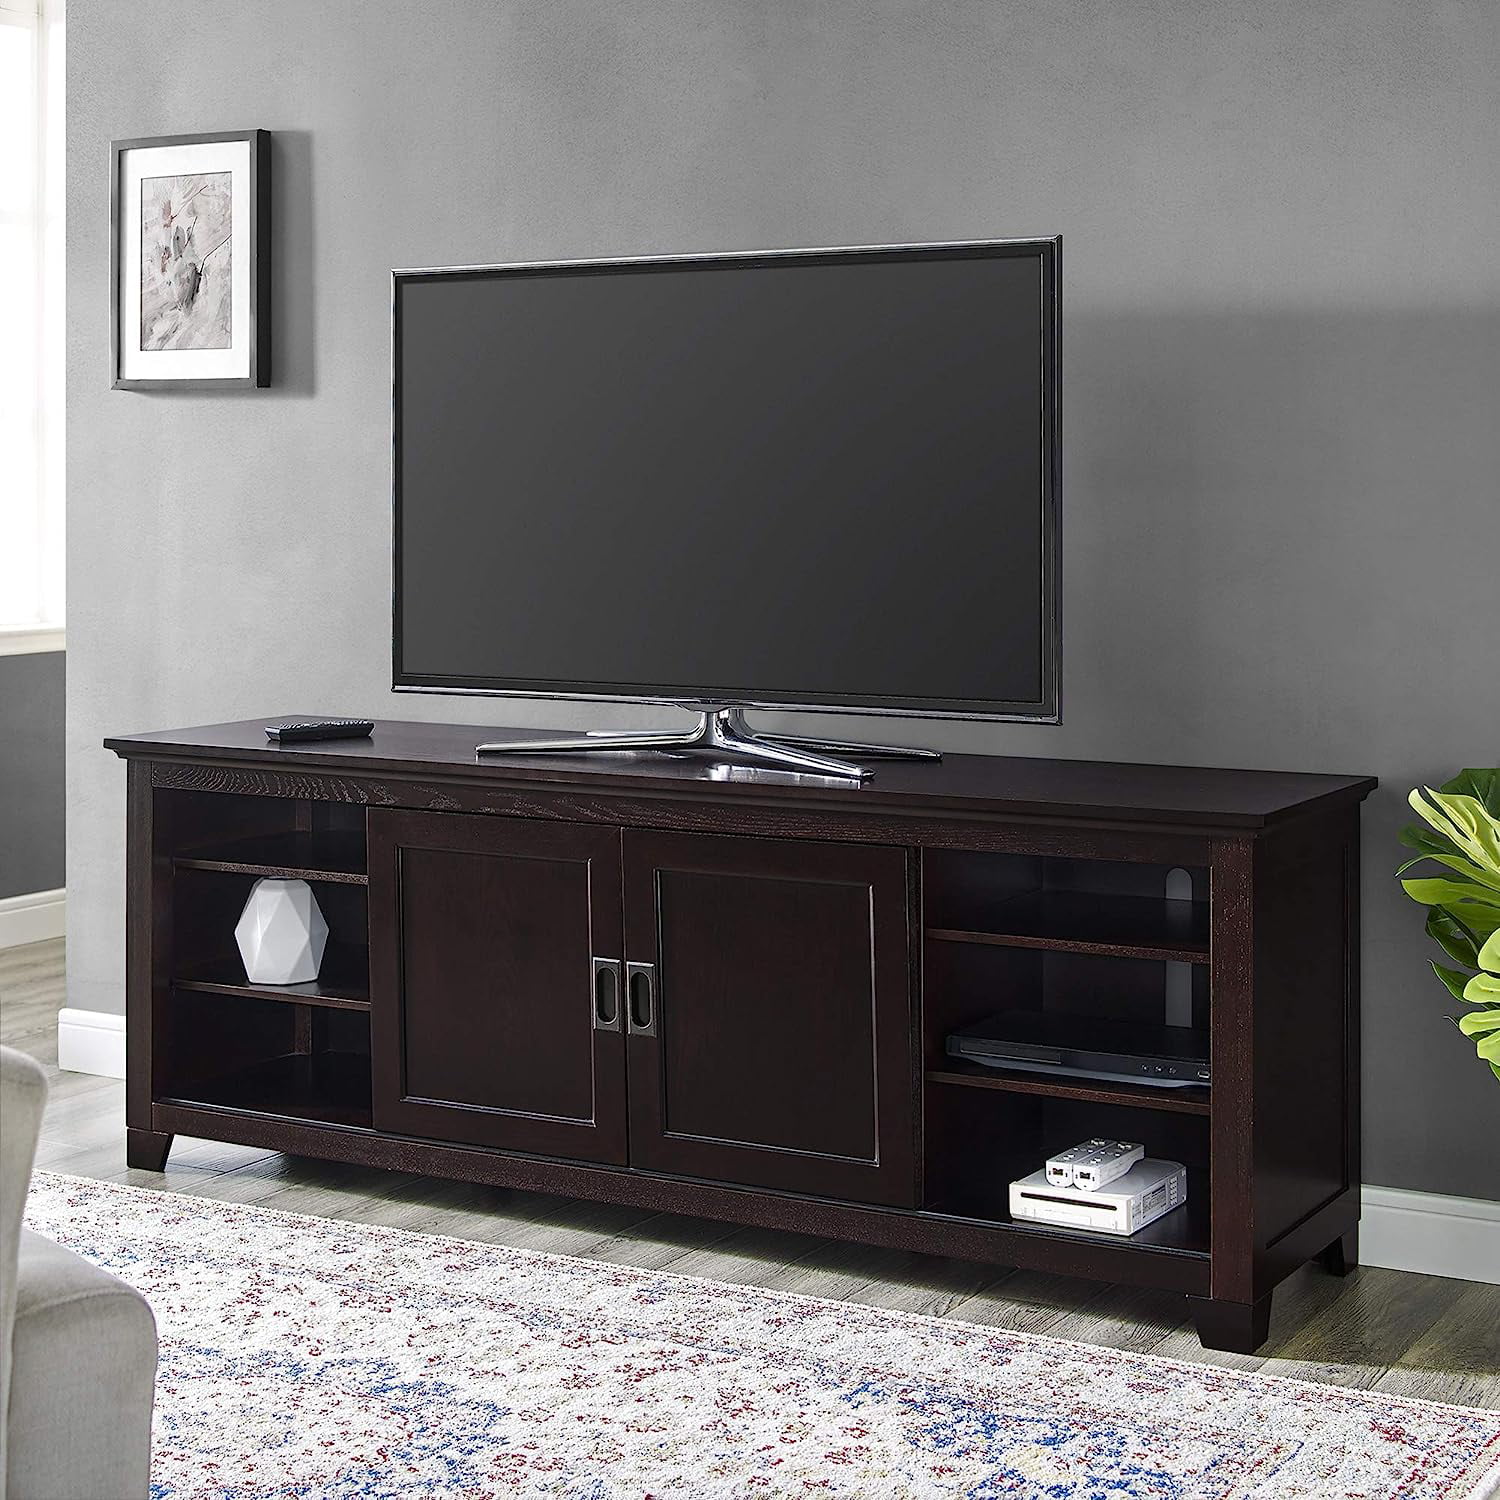 Edison Brahm Classic Glass Door Storage TV Console for TVs up to 80 ...